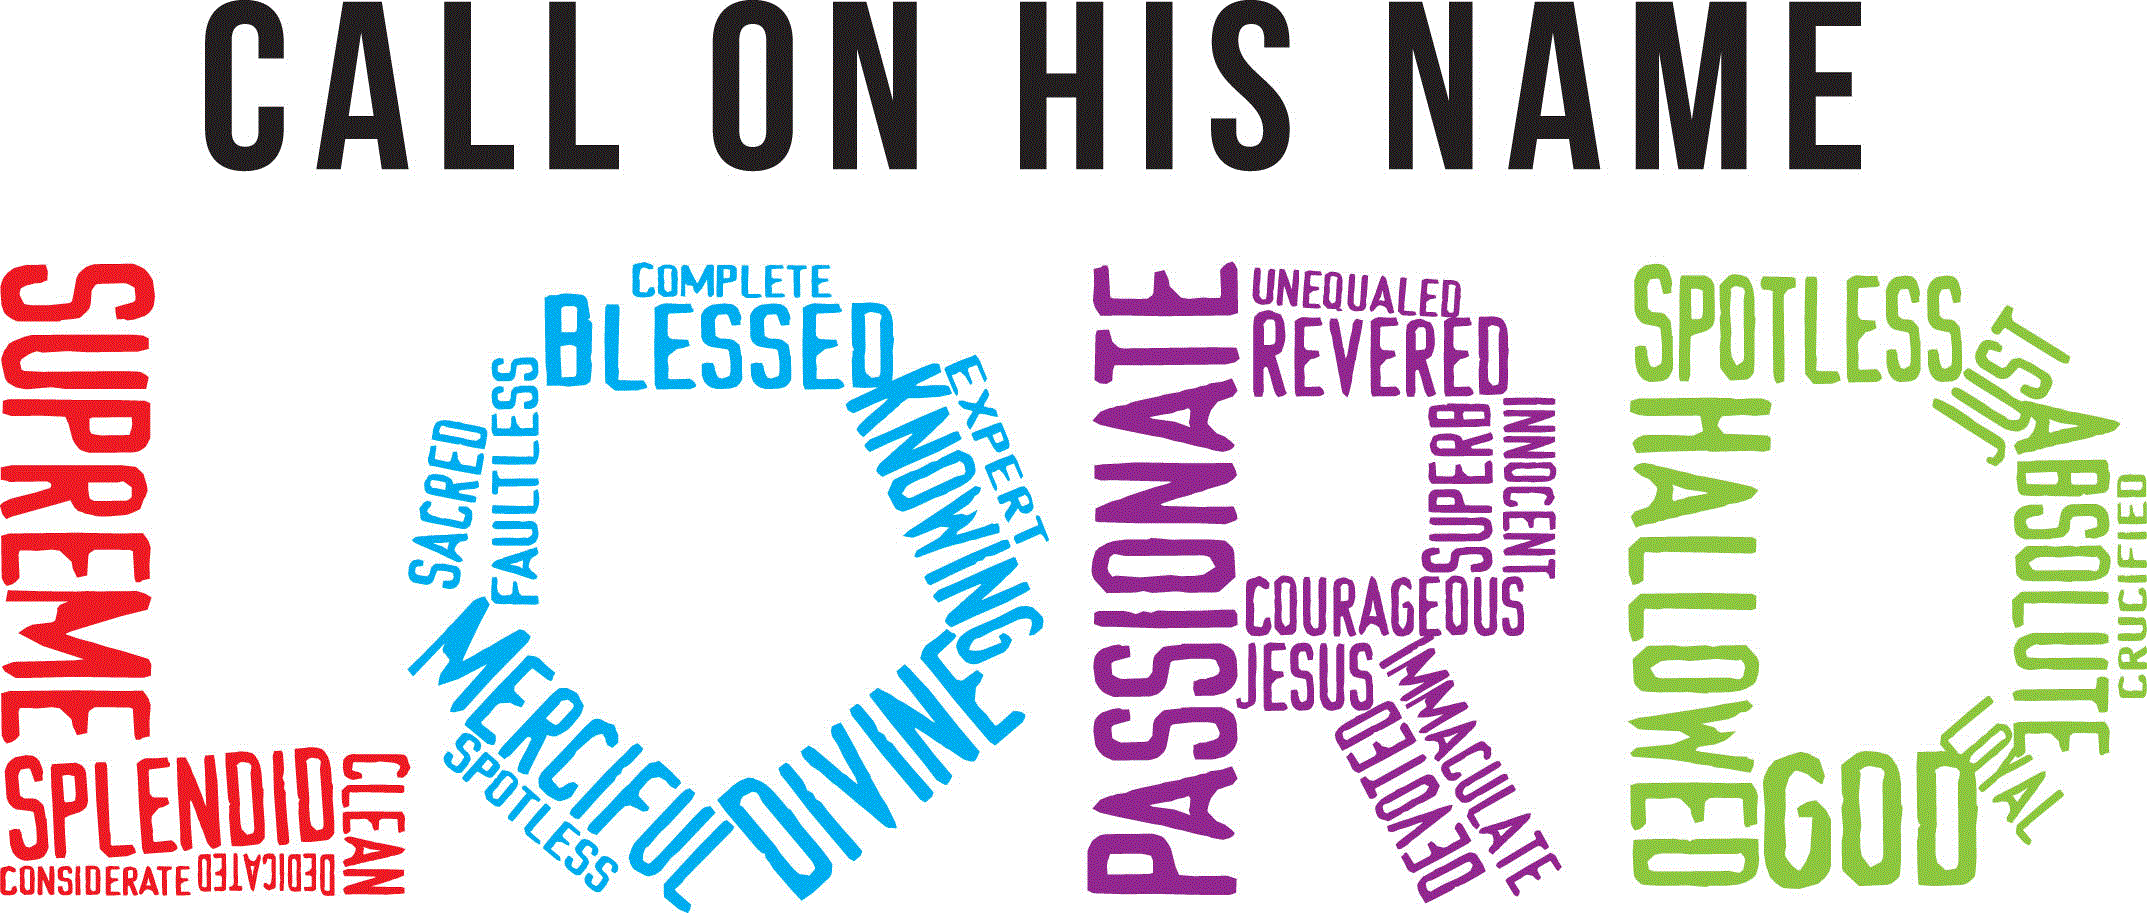 call on his name over the word lord formed with words describing gods character